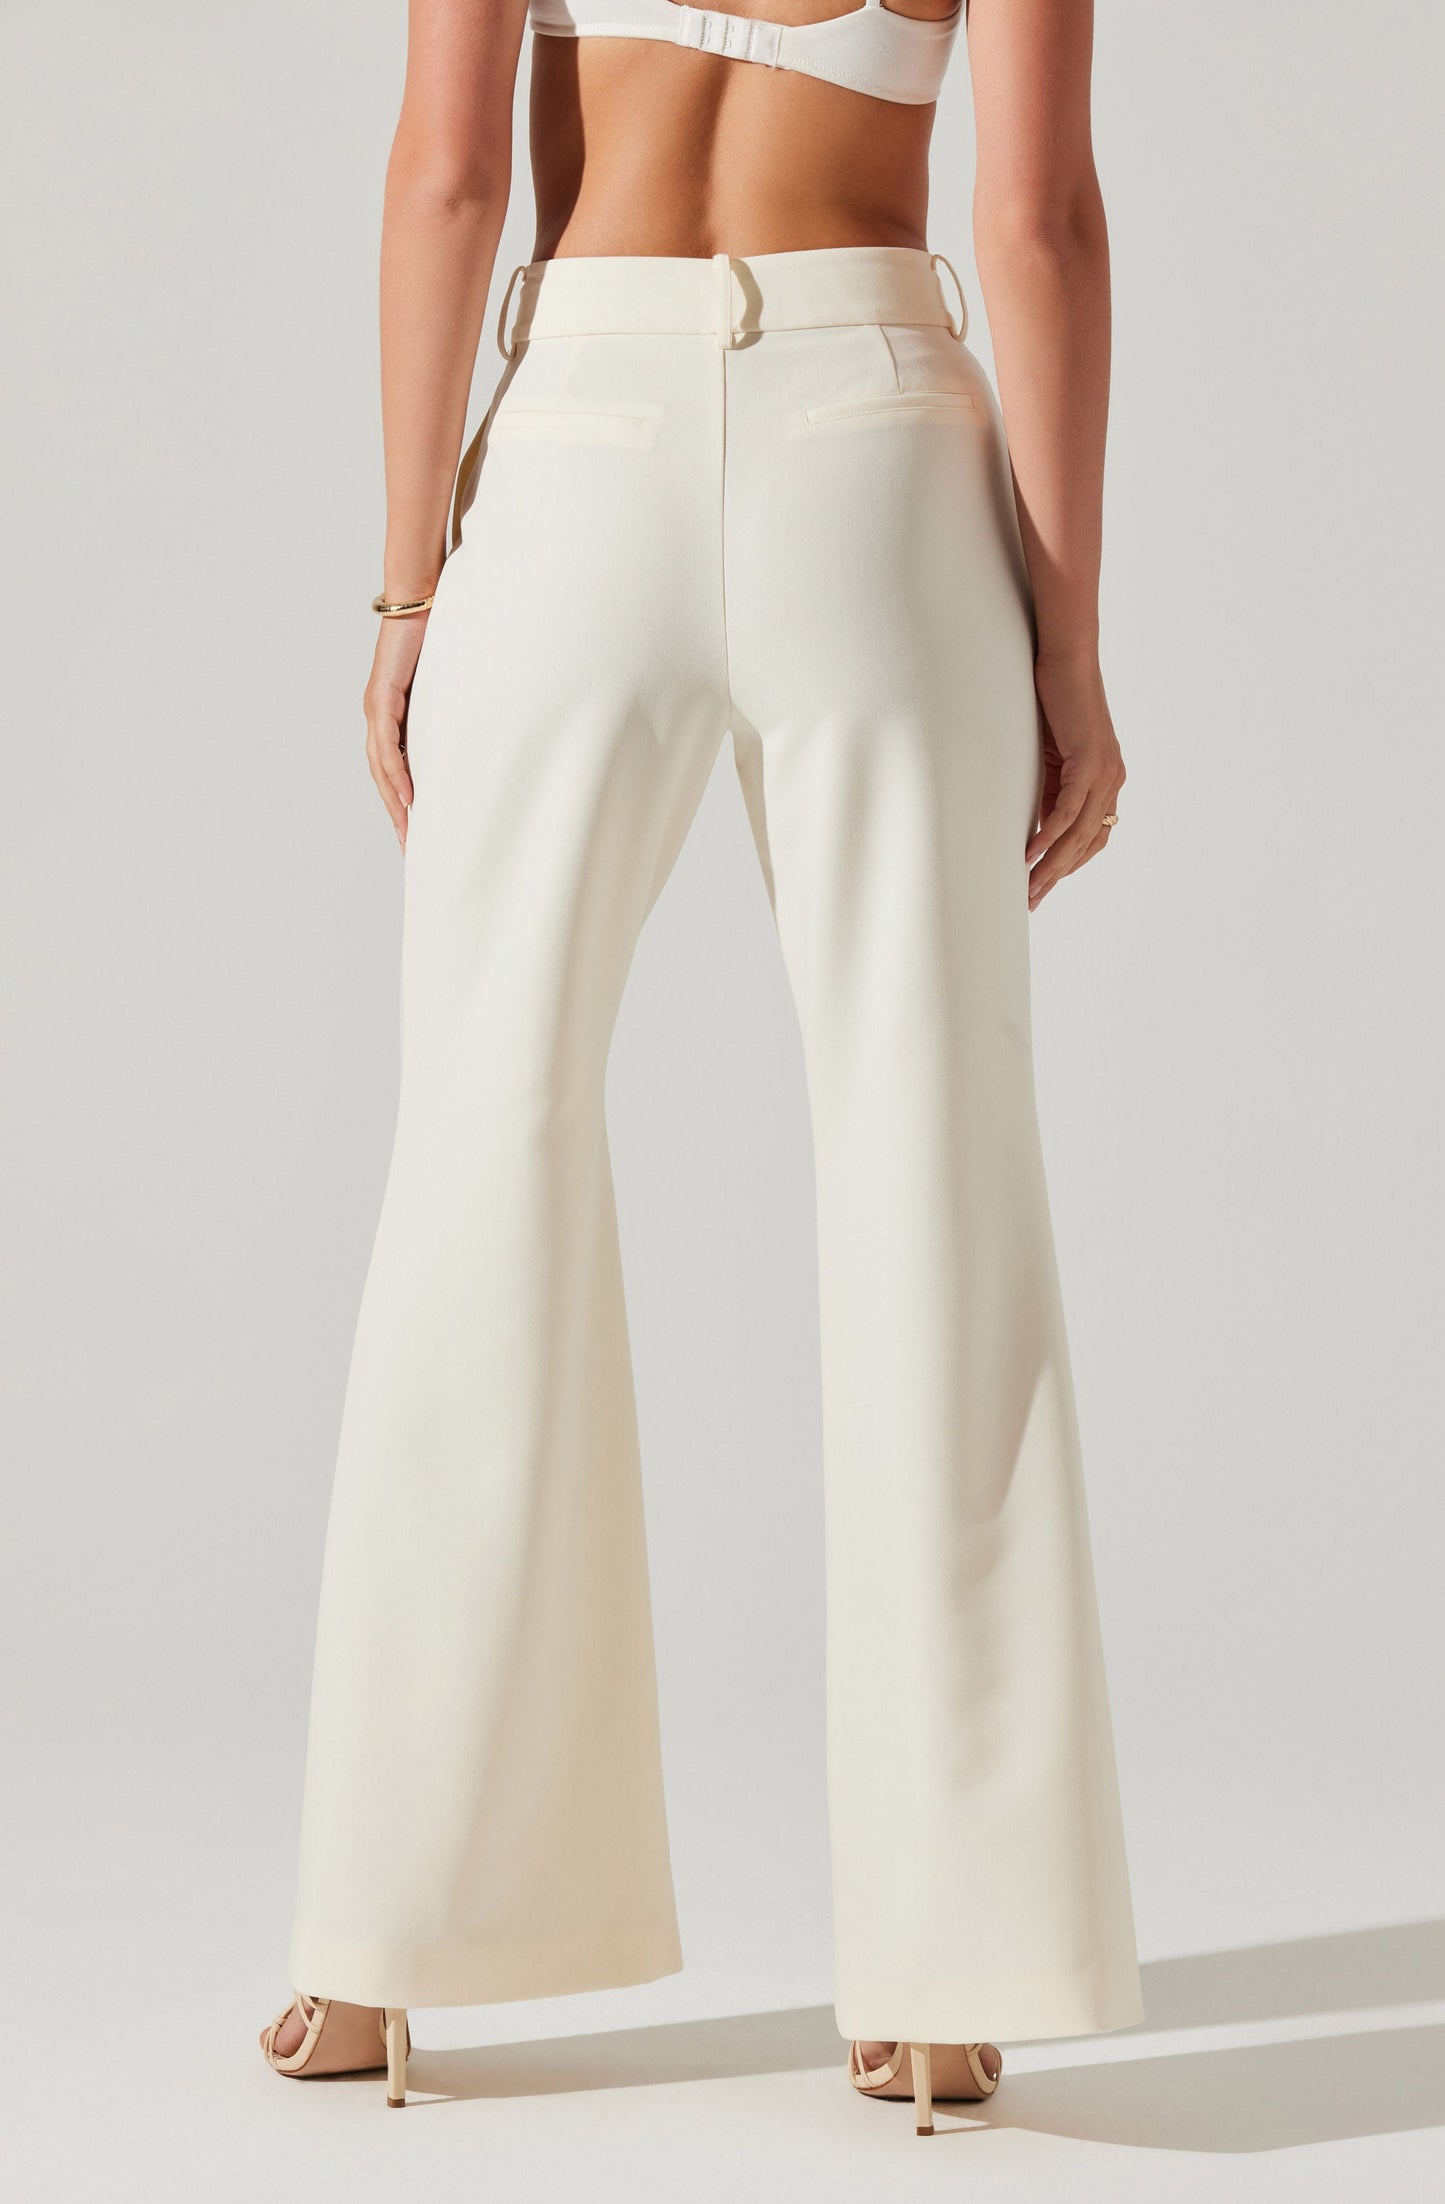 Chaser High Waist Flare Pants